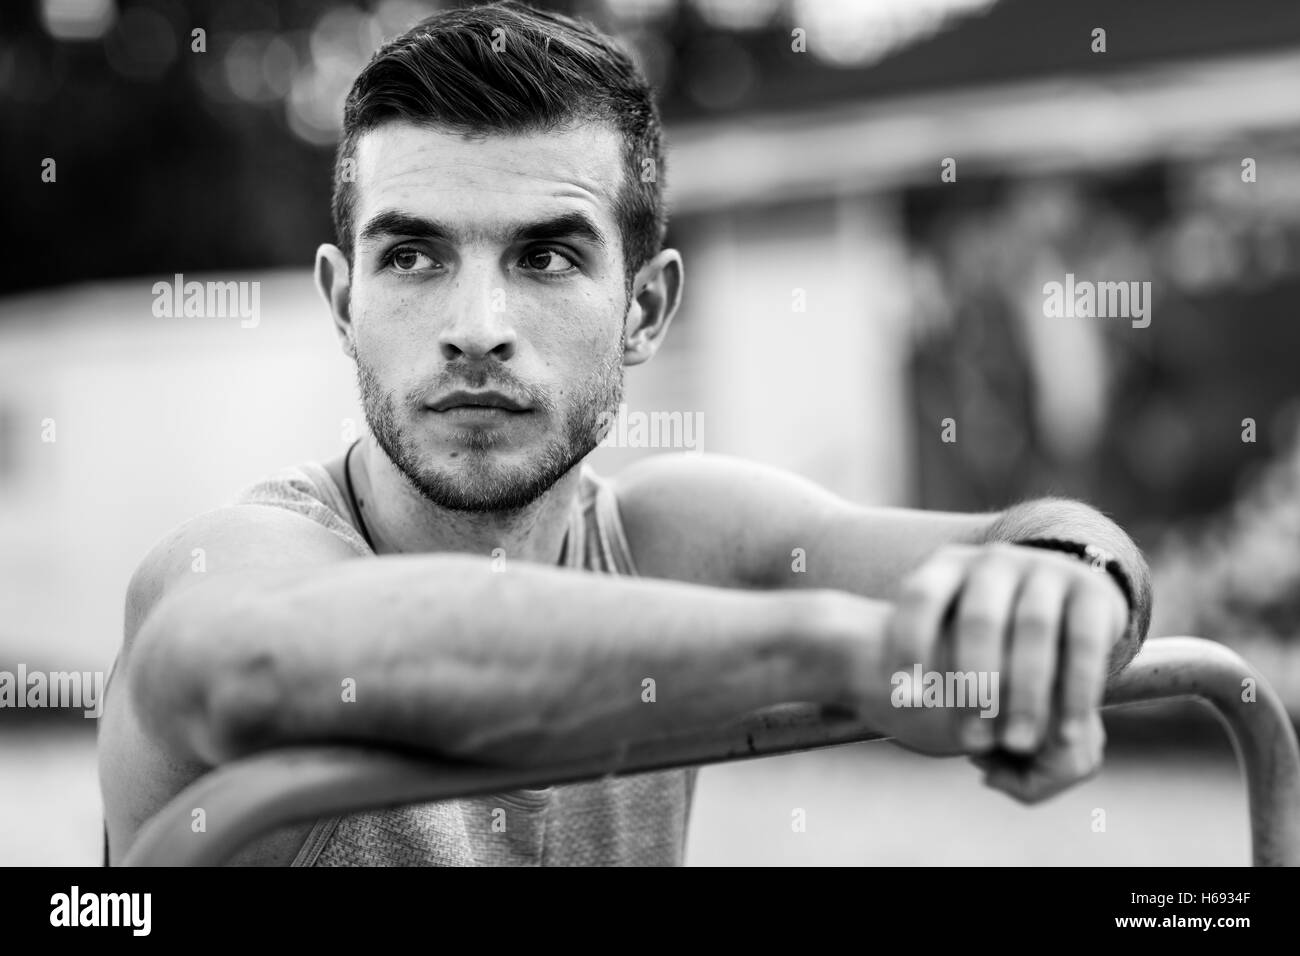 Black and white portrait of sporty man relaxing after training Stock Photo